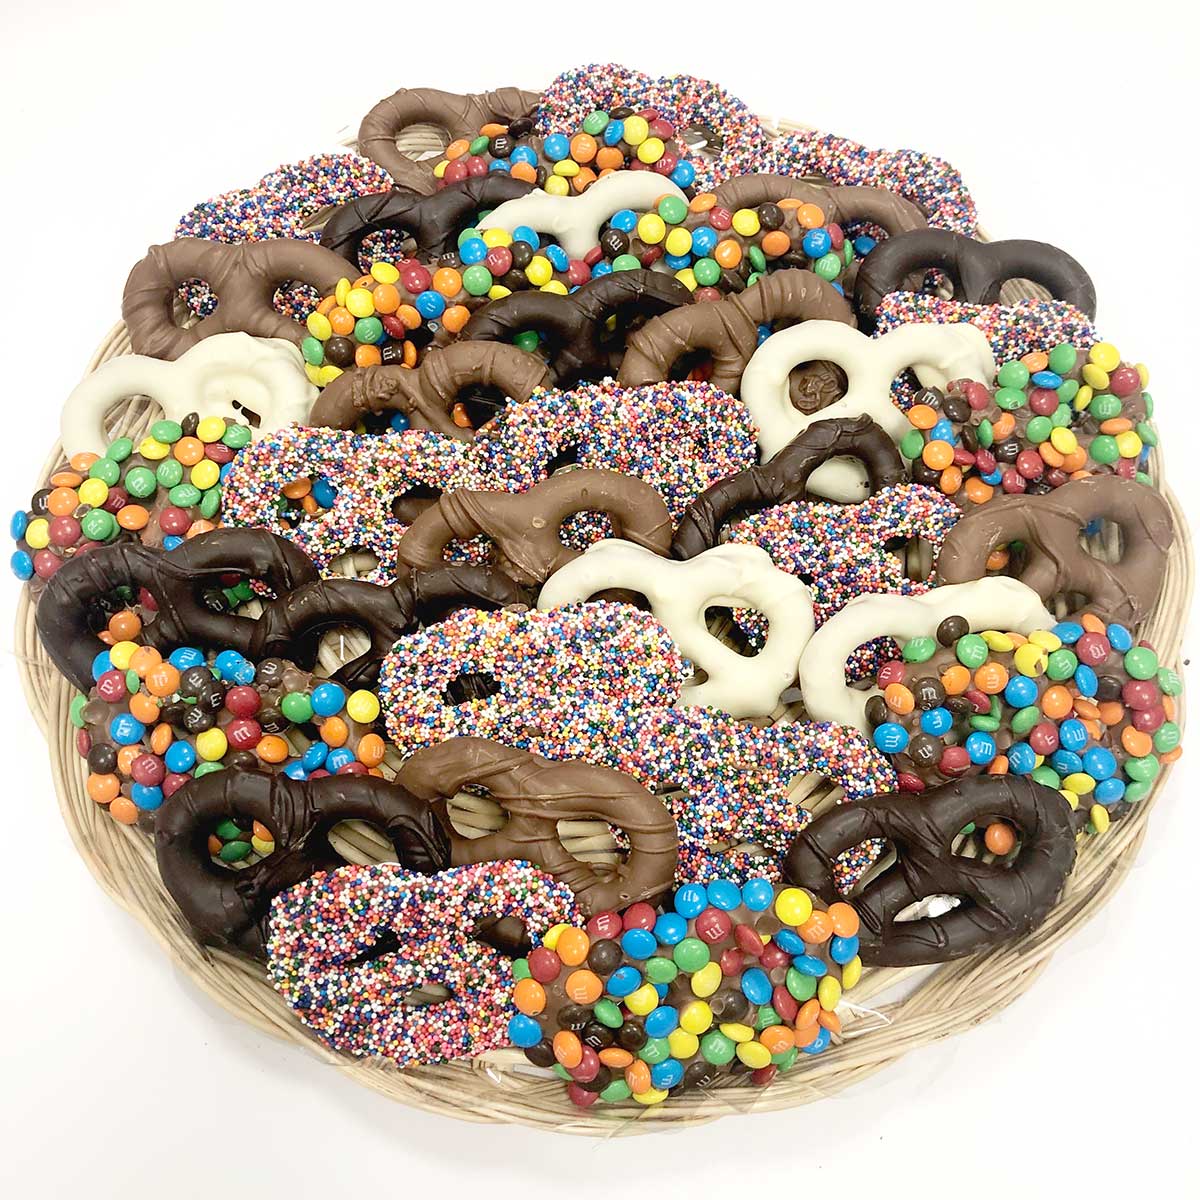 Photo of Gift Platter - Chocolate Covered Pretzels